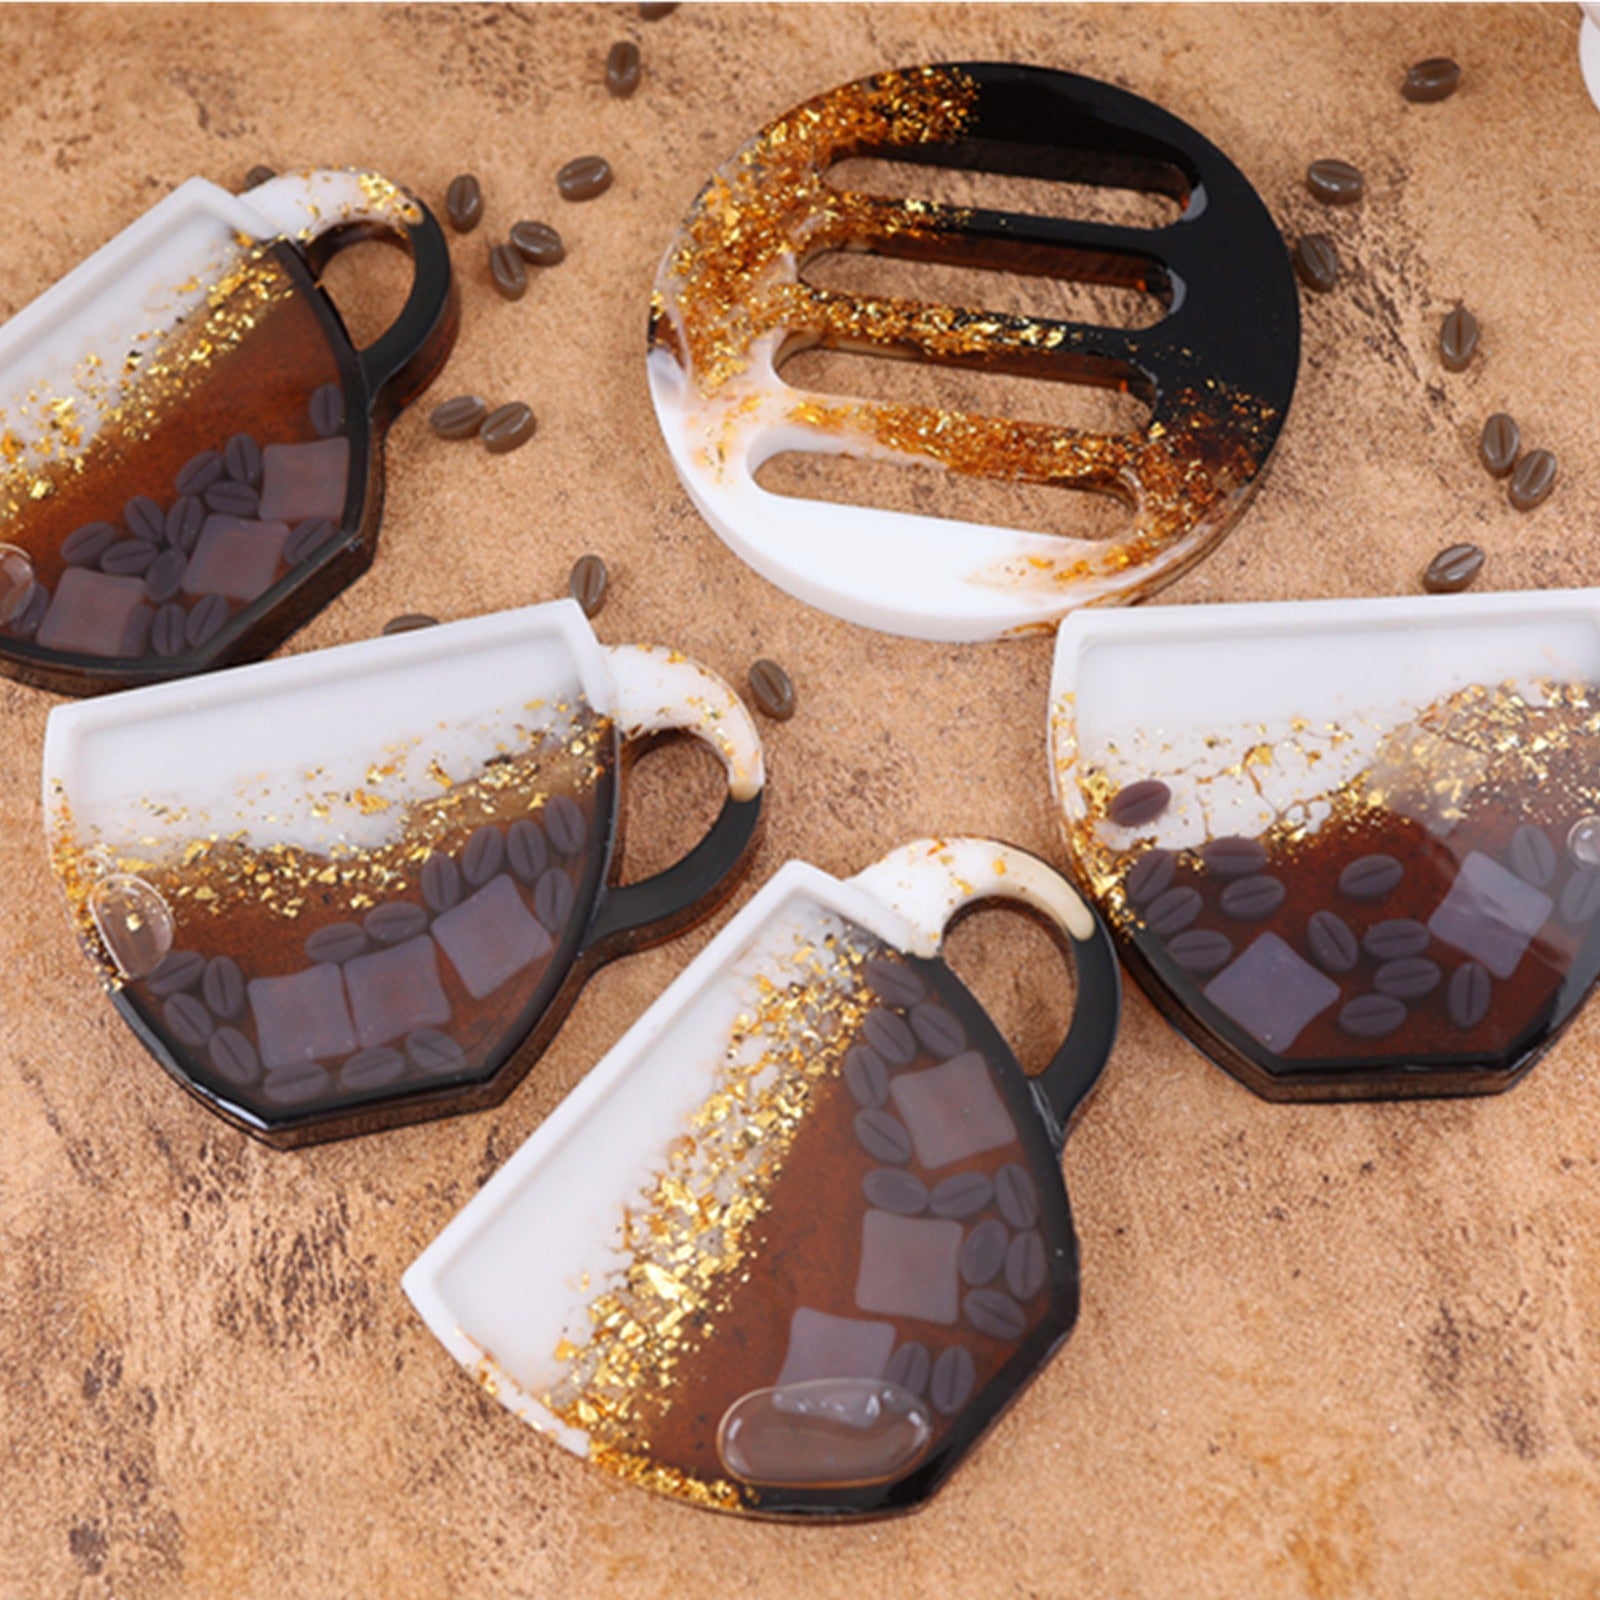 coffee cup silicone resin mold kit